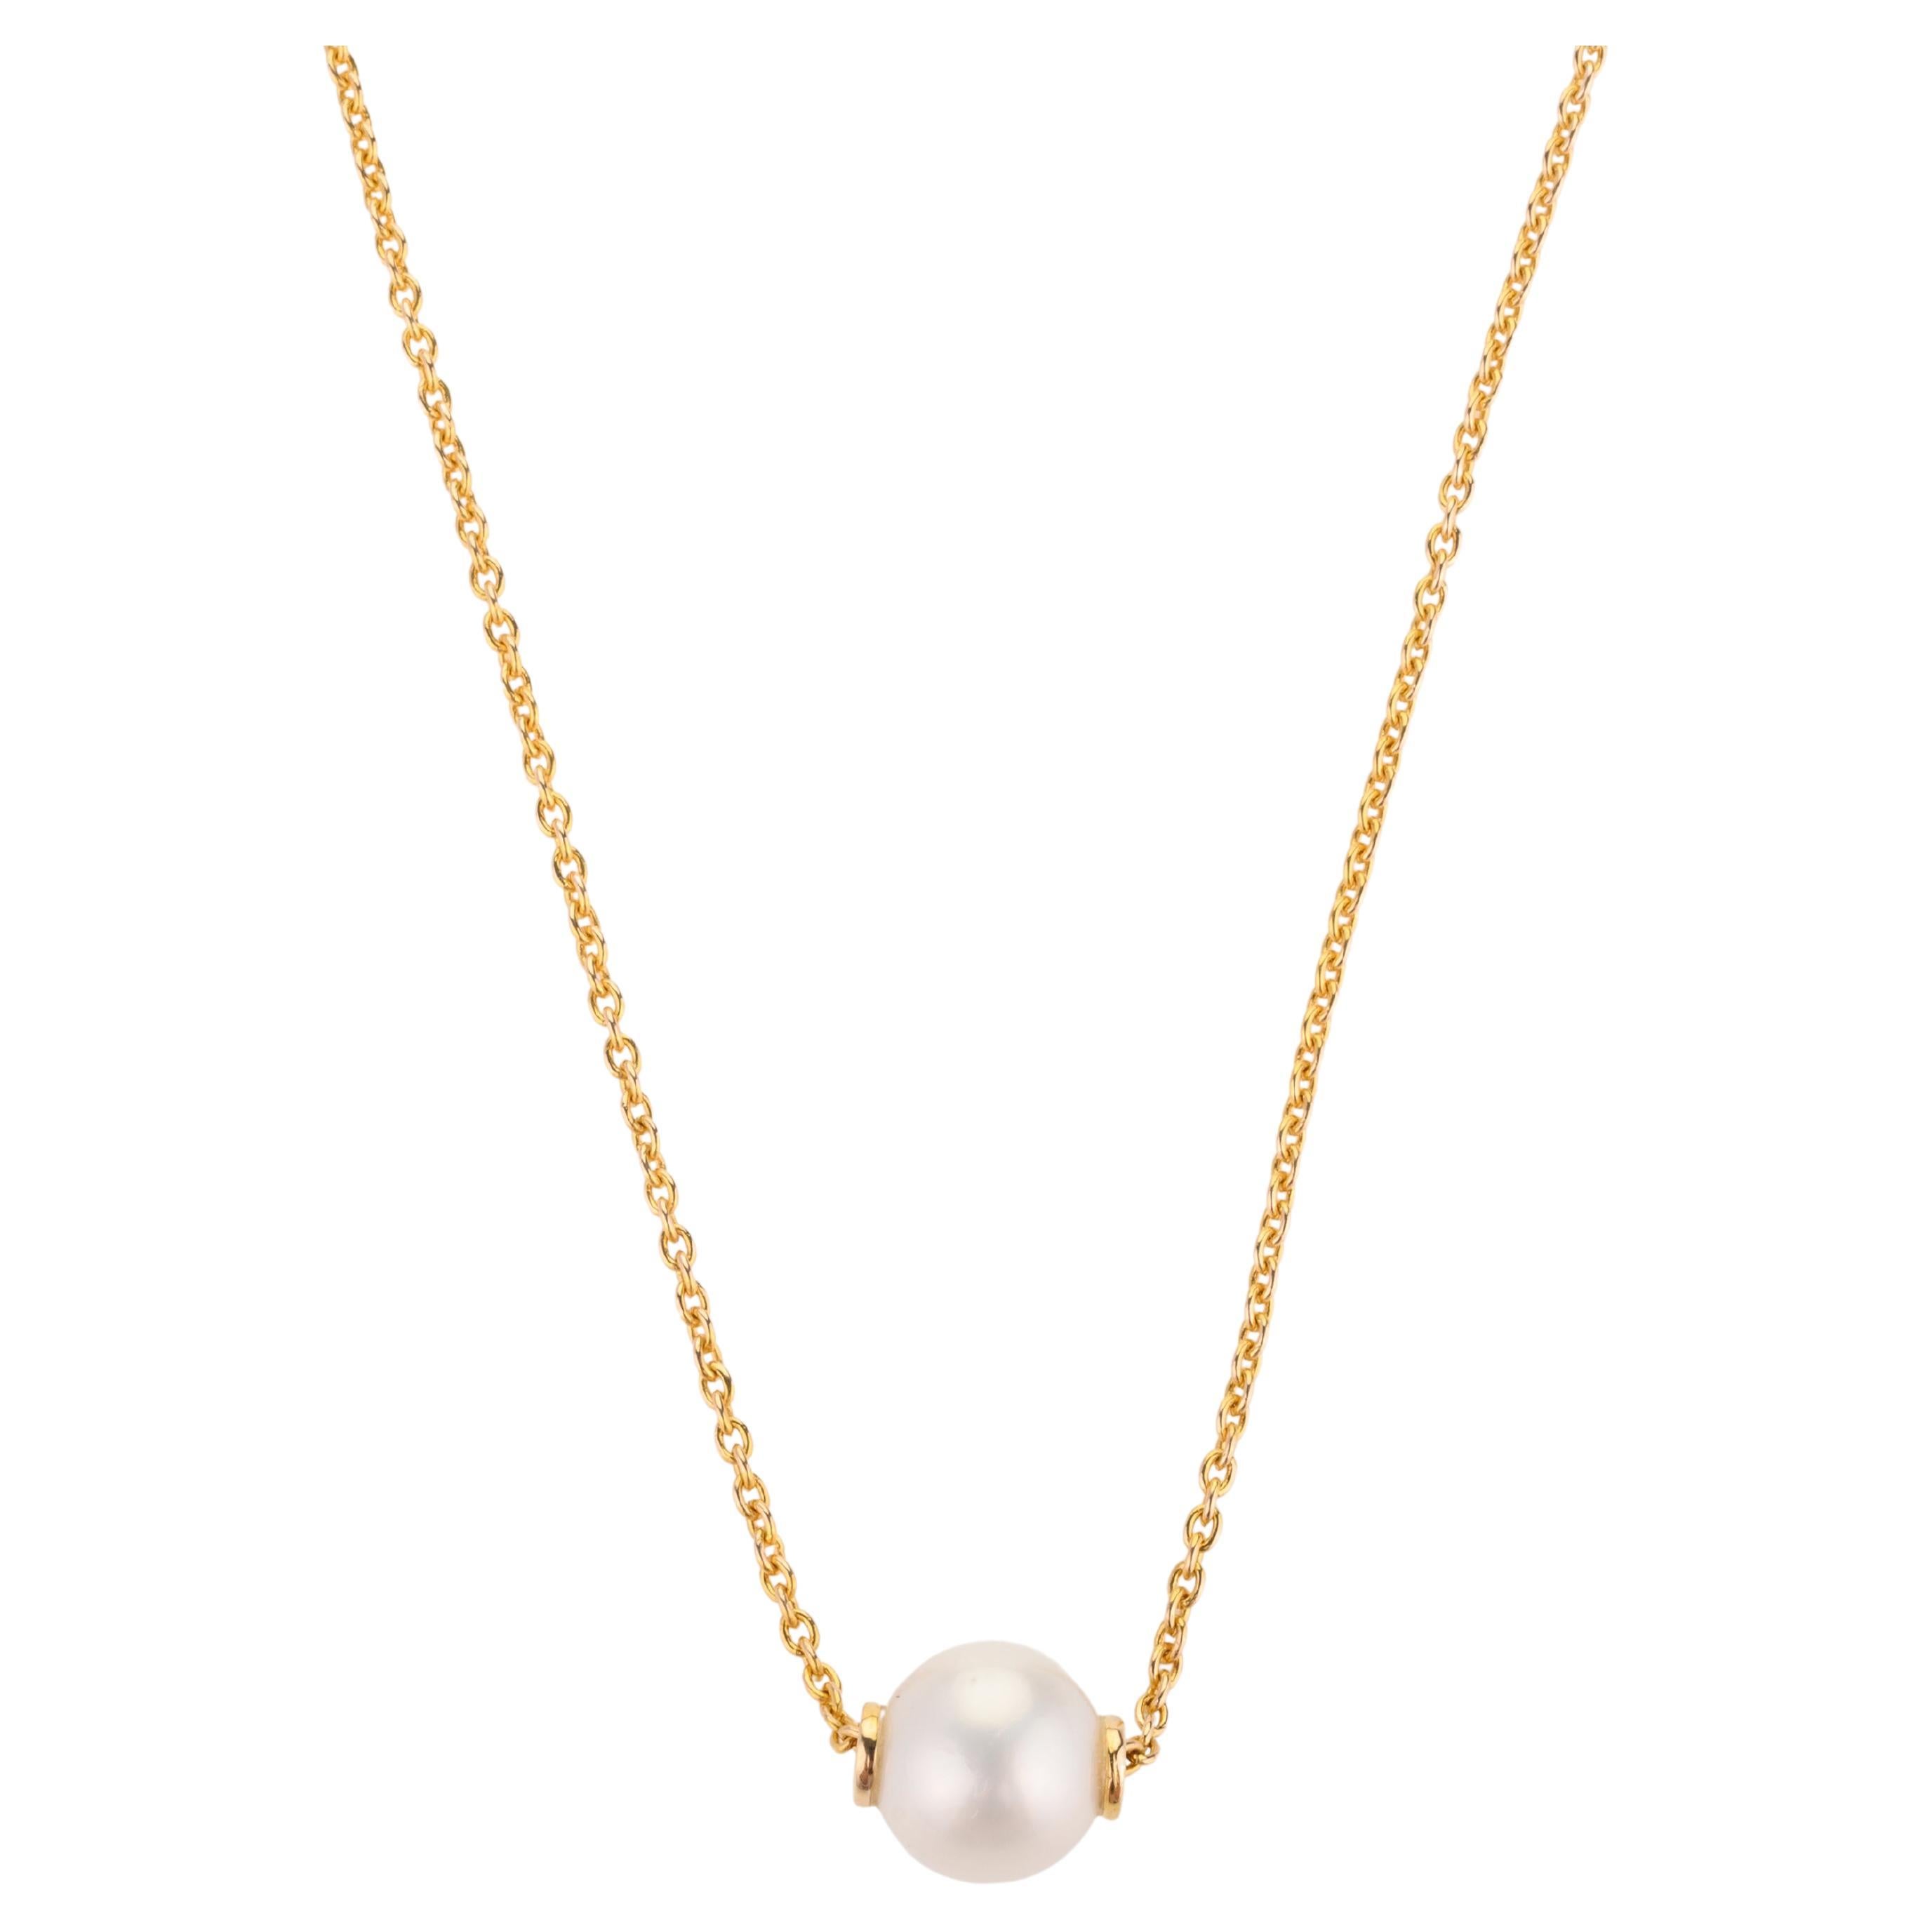 Modern 5 Carat Single Pearl Chain Necklace in 18k Solid Yellow Gold For Sale